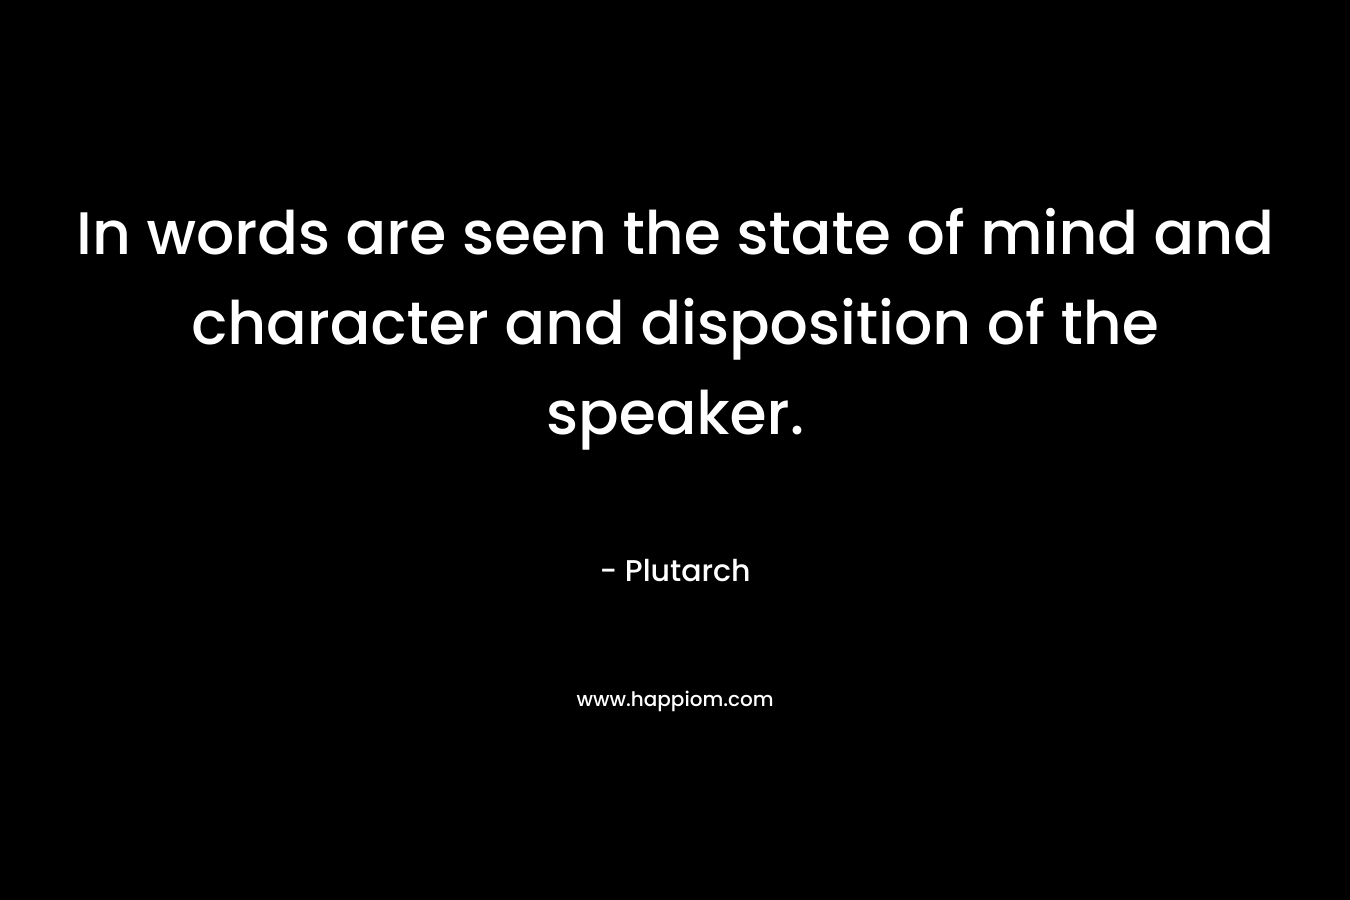 In words are seen the state of mind and character and disposition of the speaker. – Plutarch